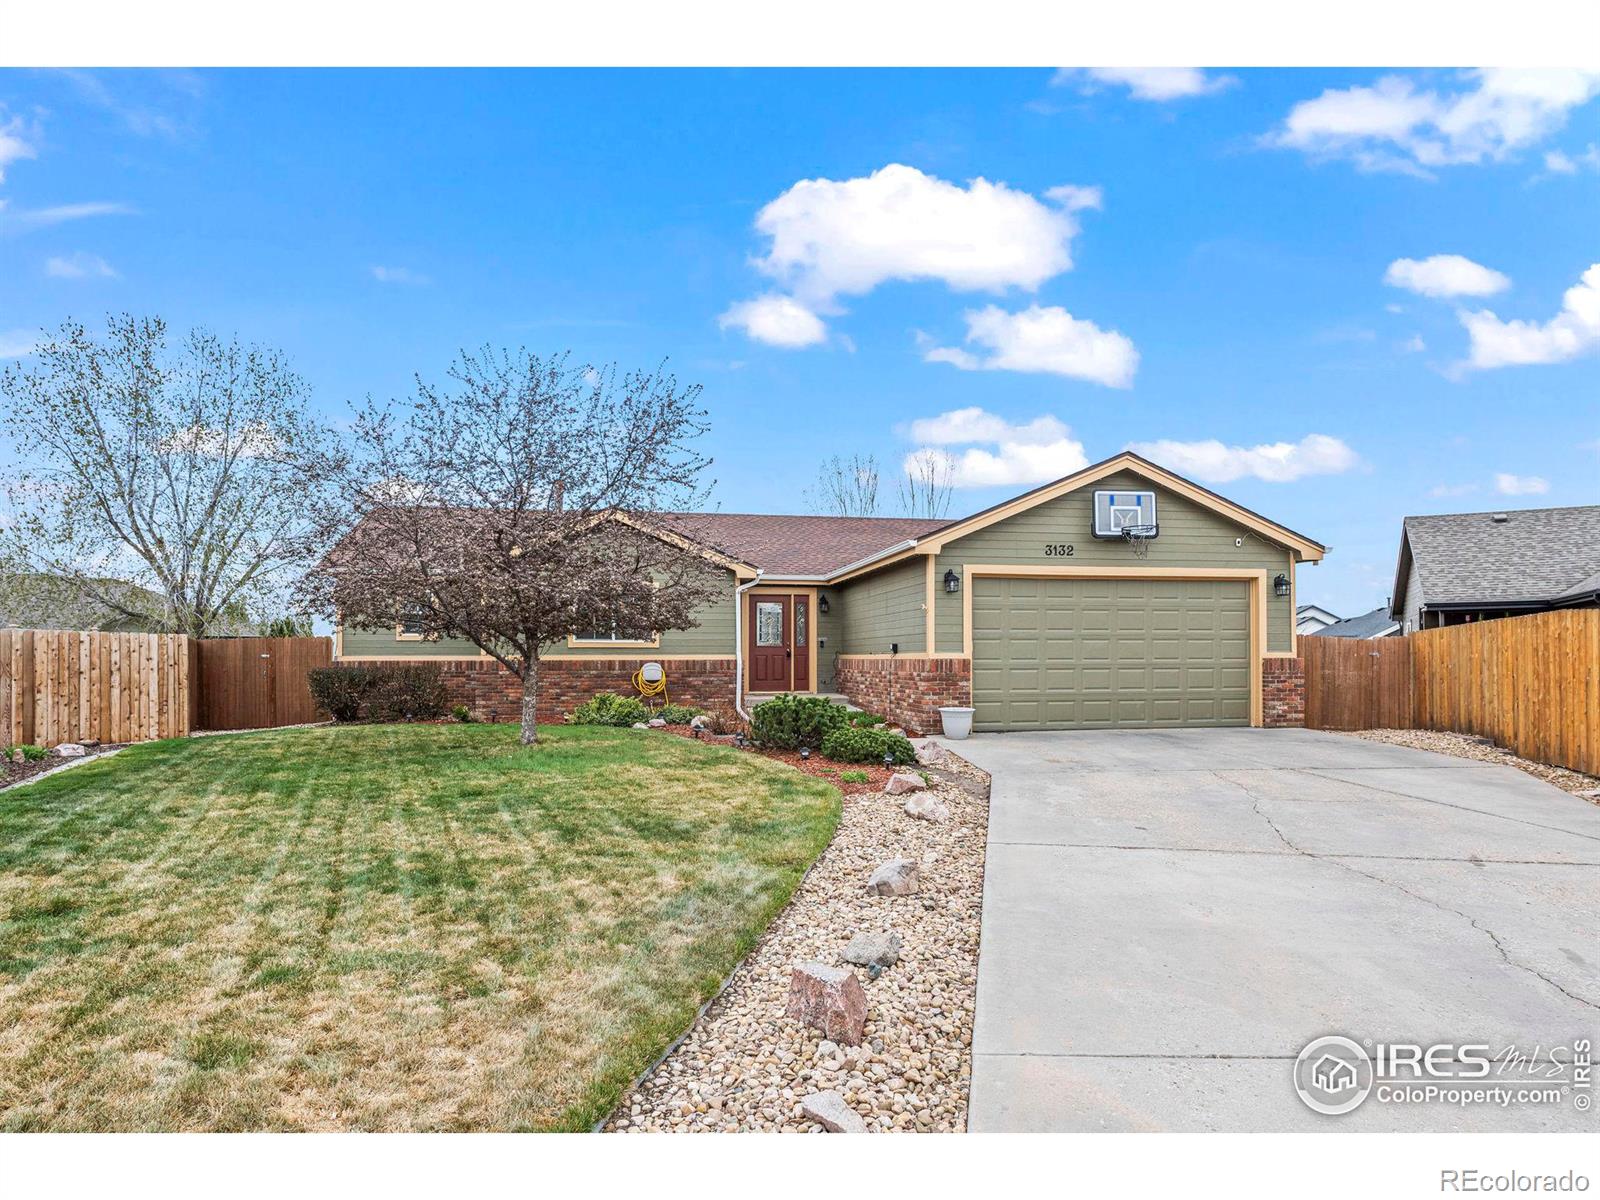 3132  52nd Avenue, greeley MLS: 4567891007406 Beds: 5 Baths: 3 Price: $489,000